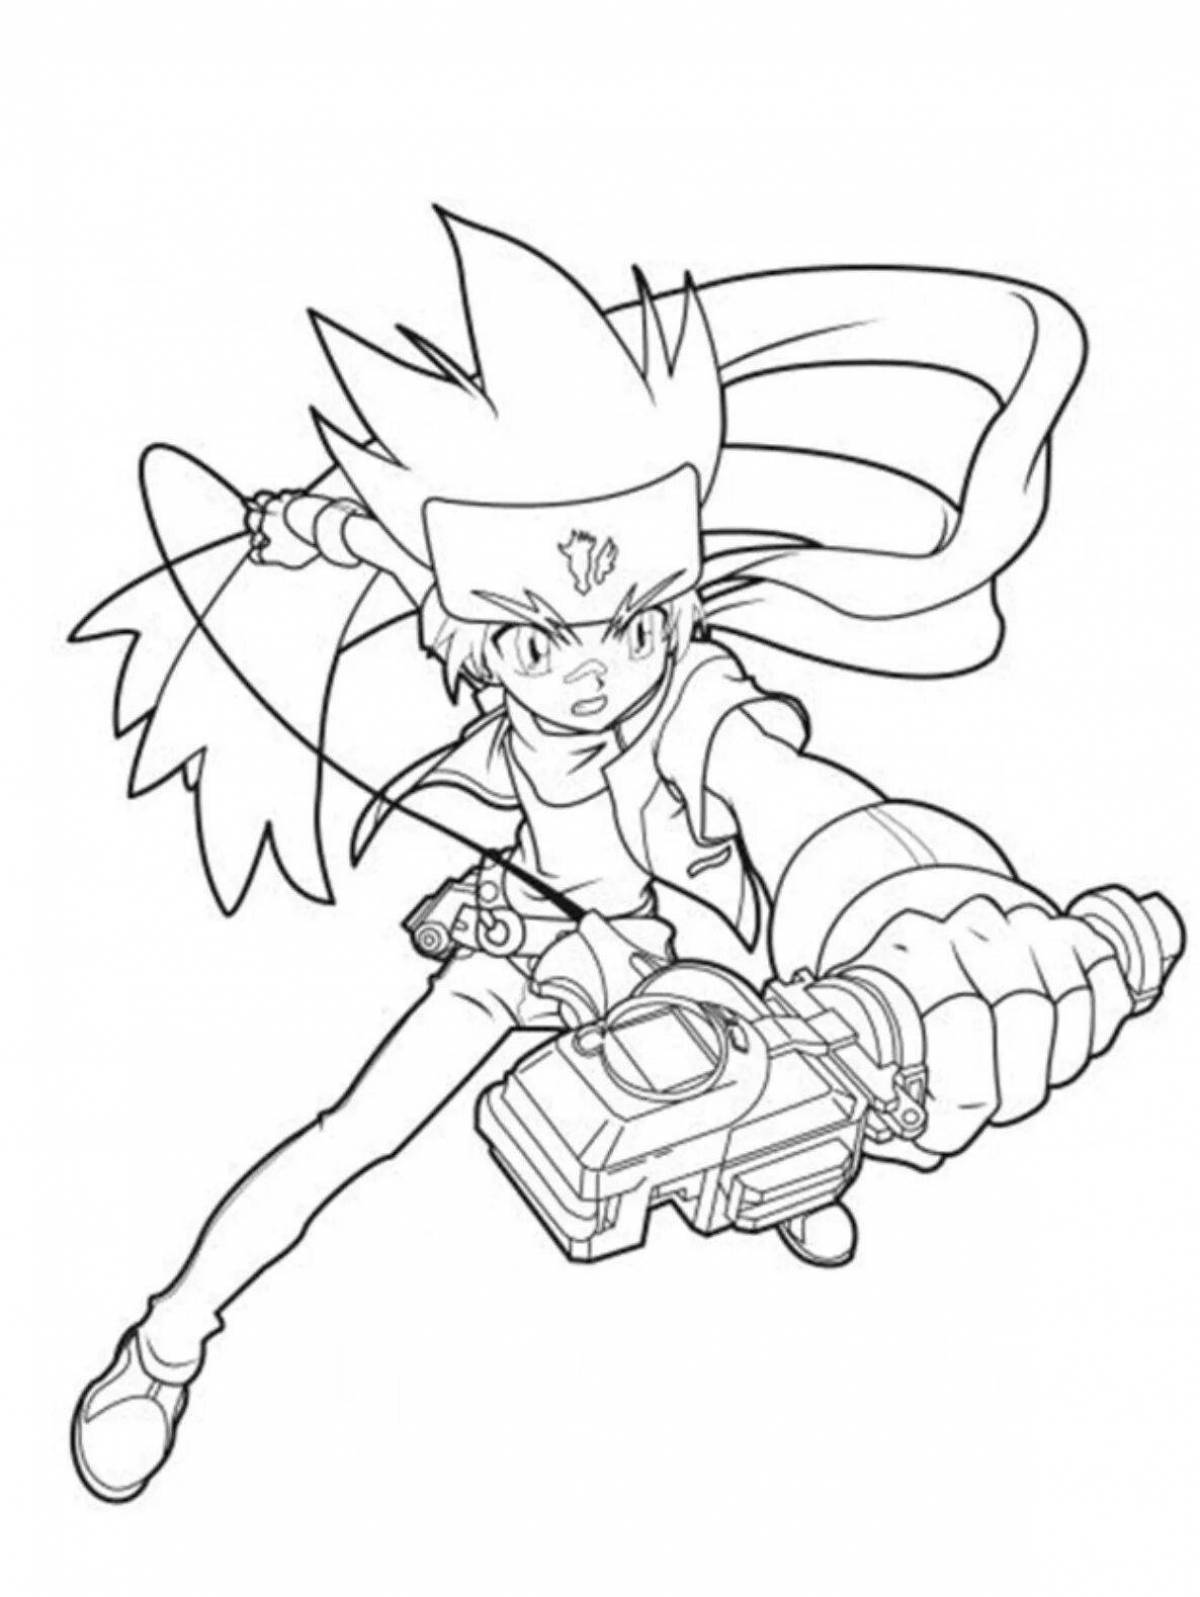 Attractive beyblade burst coloring page